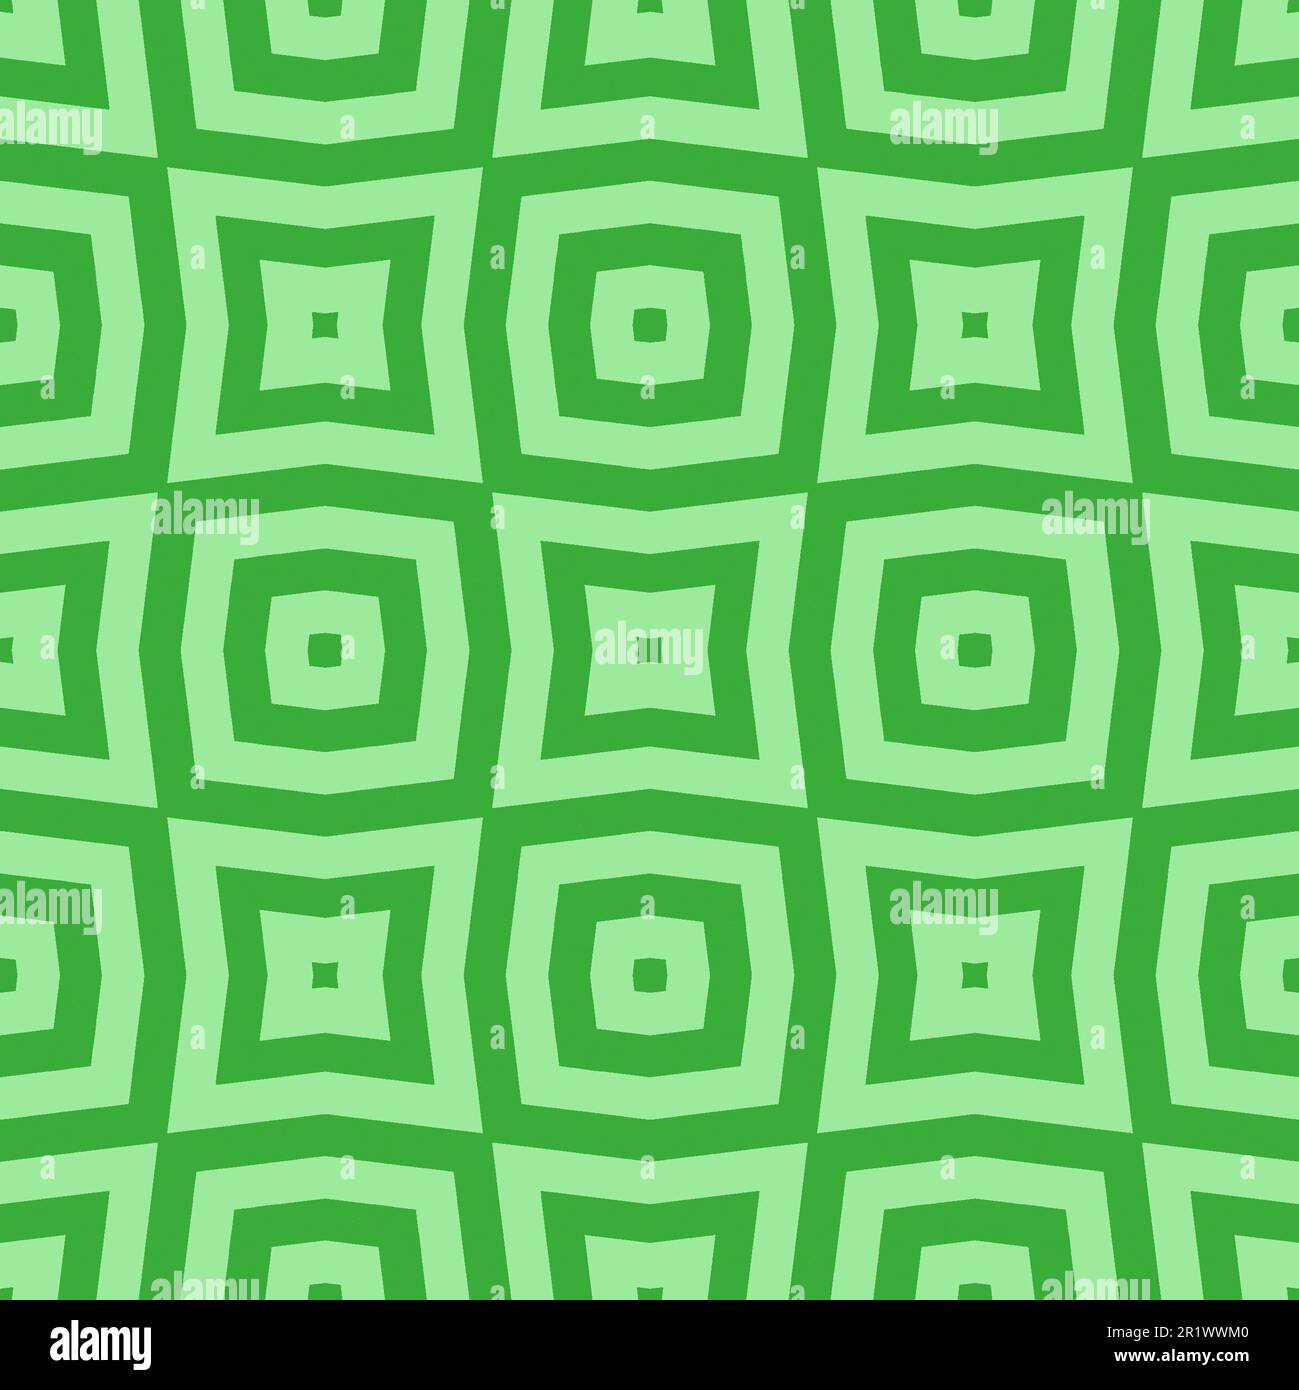 Psychedelic two tone green seamless pattern with repeating concentric squares. Stock Photo